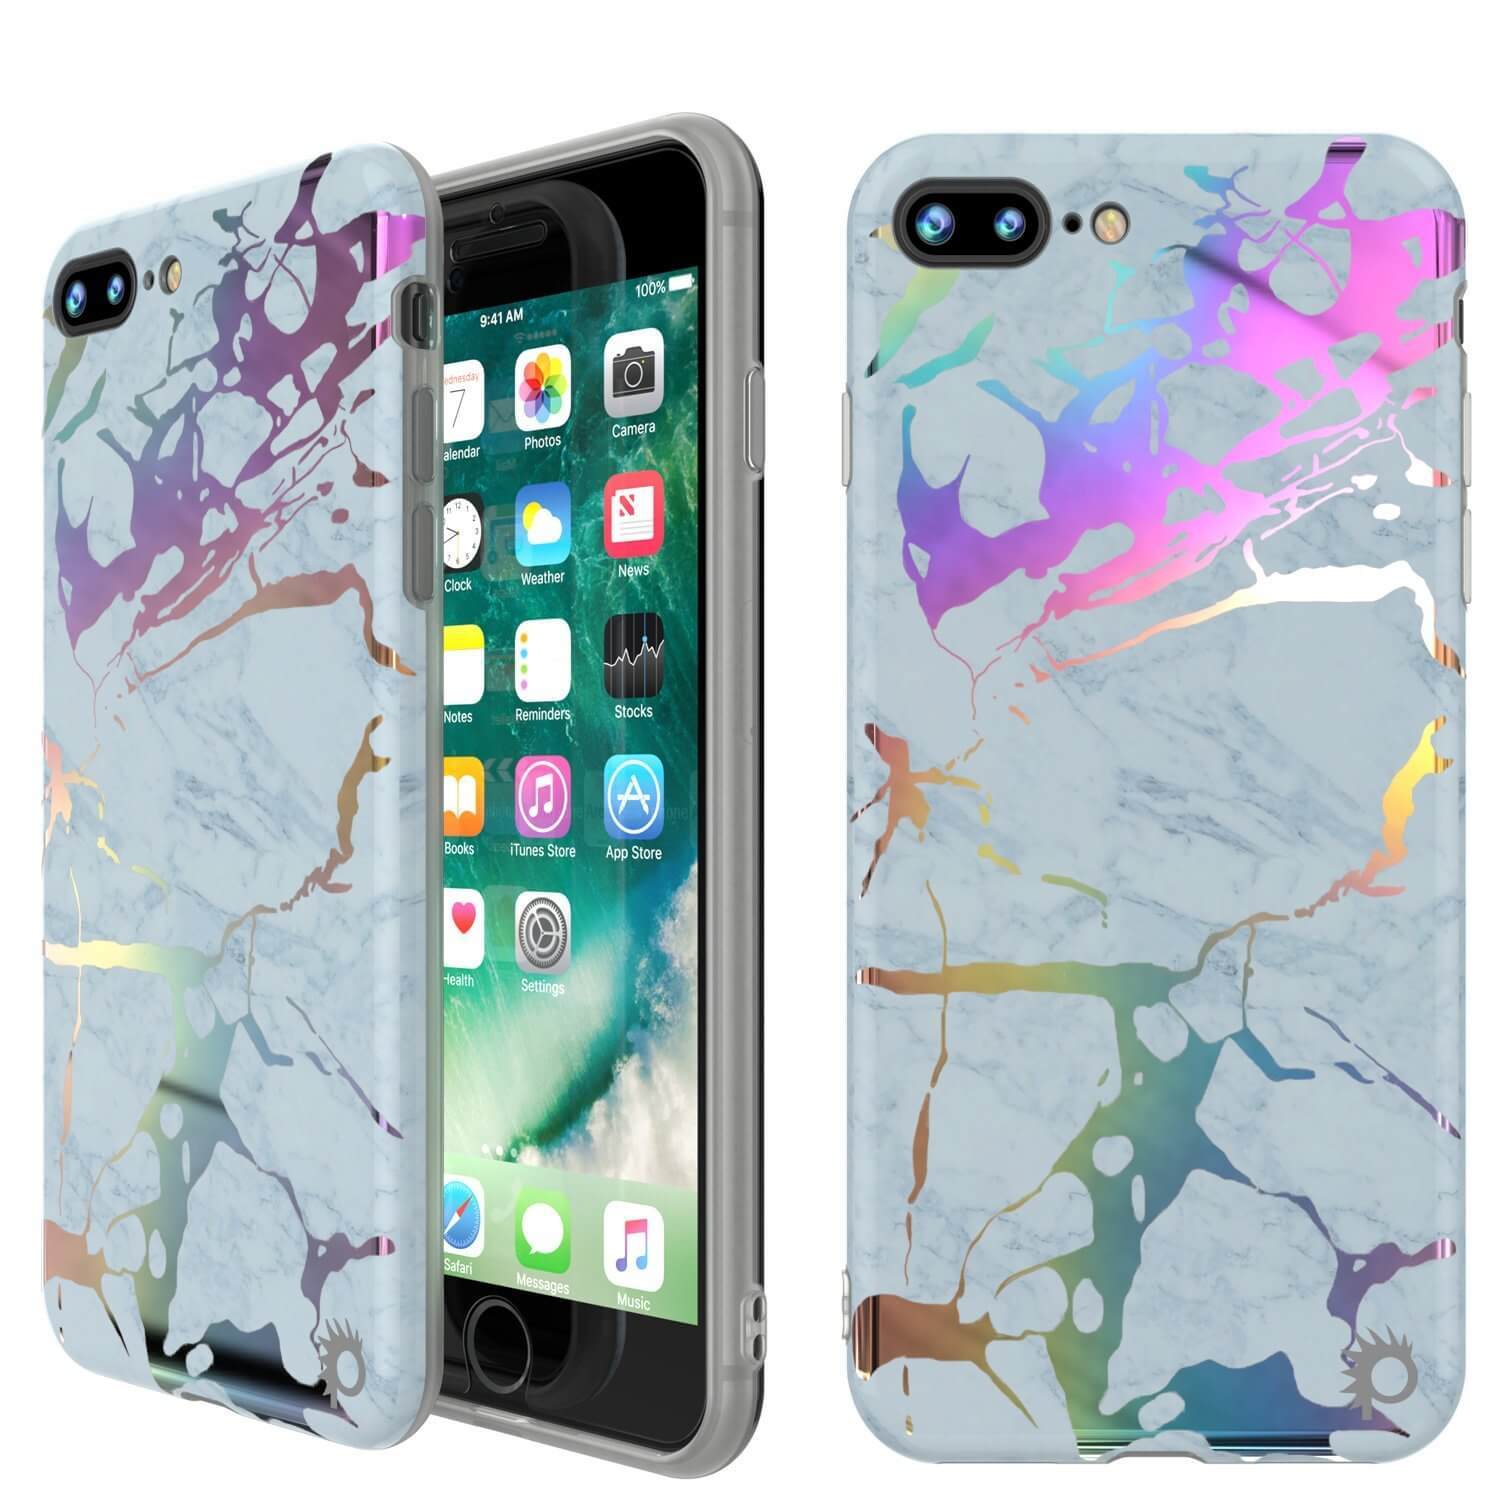 Punkcase iPhone 8+ / 7+ Plus Marble Case, Protective Full Body Cover W/9H Tempered Glass Screen Protector (Blue Marmo) - PunkCase NZ